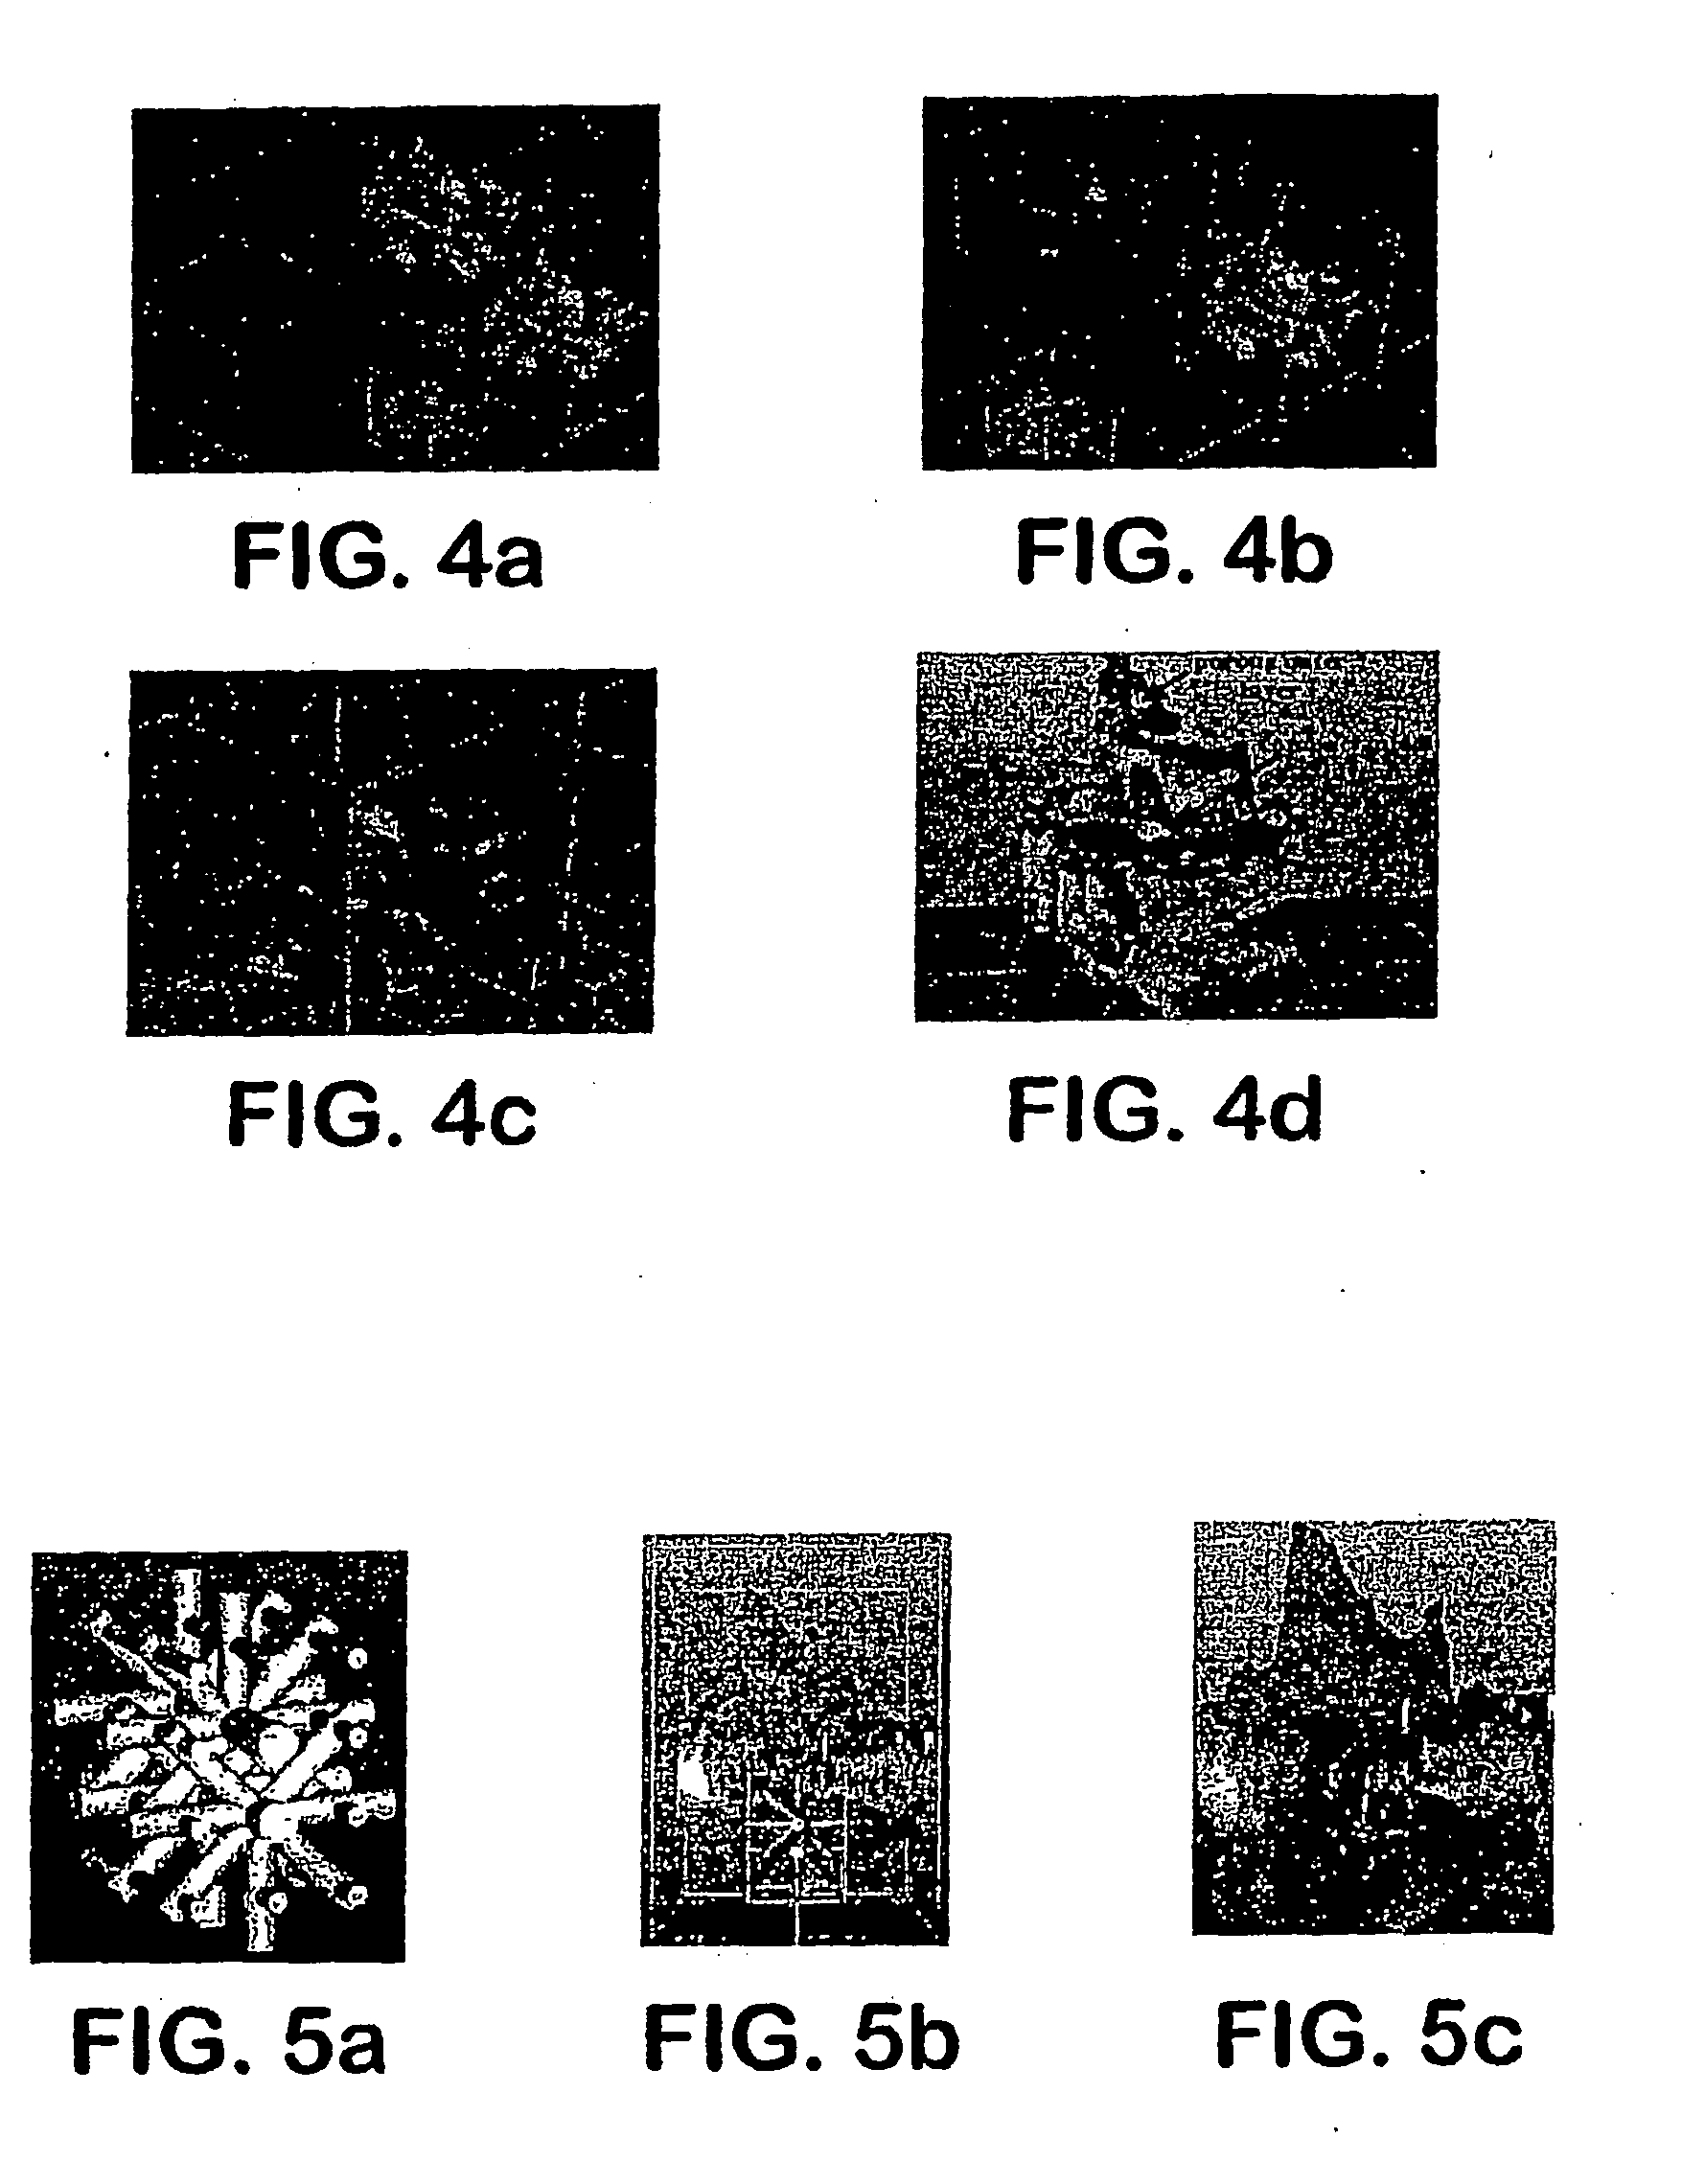 Method and apparatus for computer-aided tissue engineering for modeling, design and freeform fabrication of tissue scaffolds, constructs, and devices